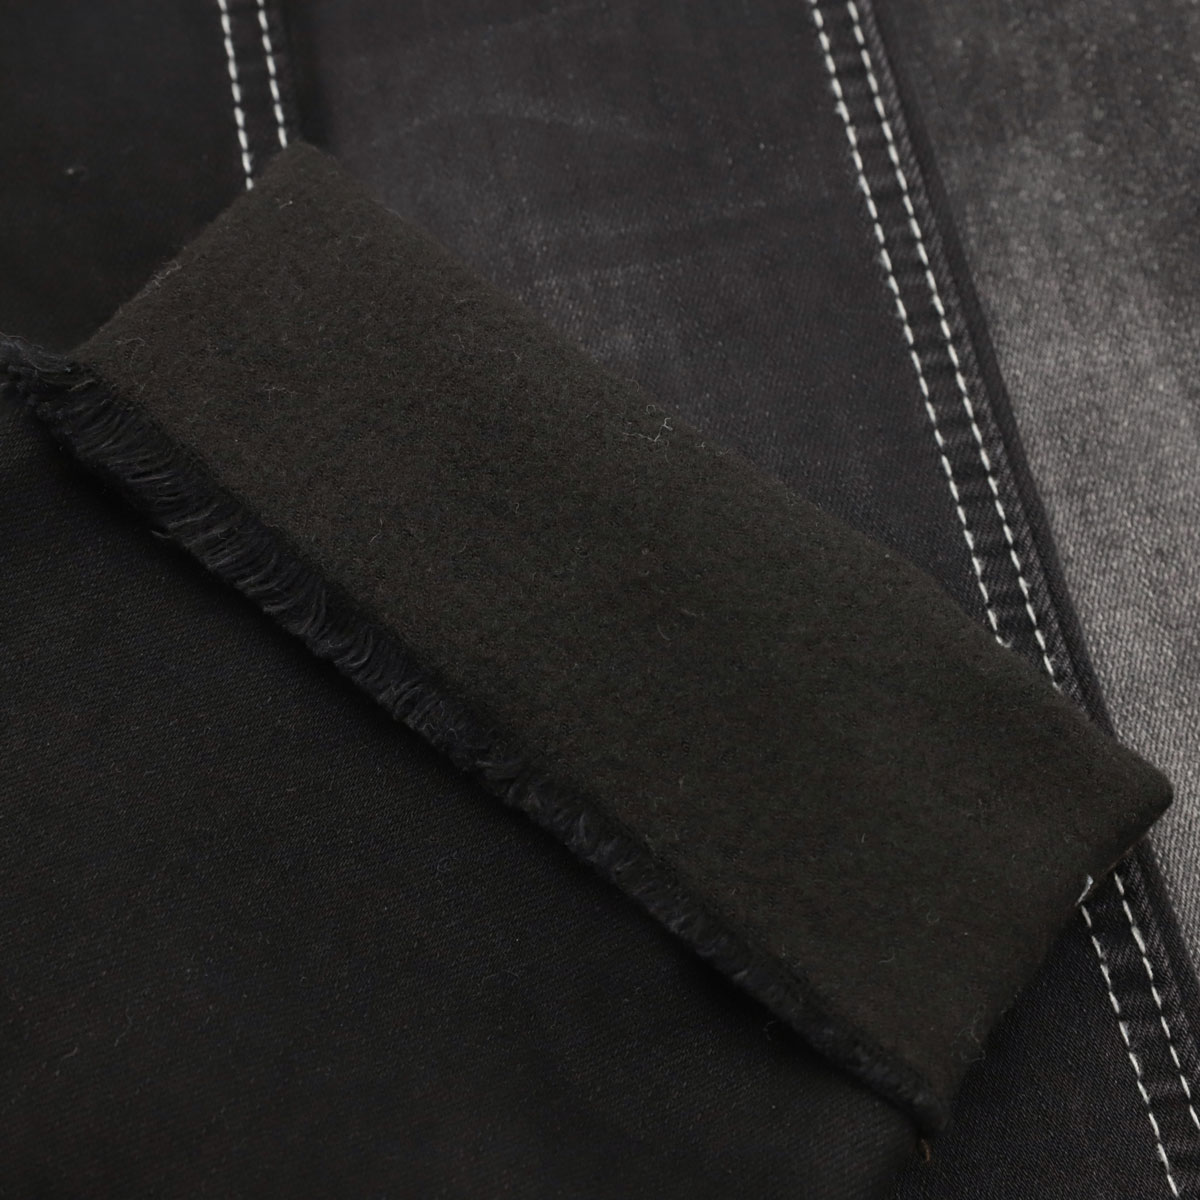 How to Use a 4 Way Stretch Denim Fabric: 5 Key Tips You Should Know 2